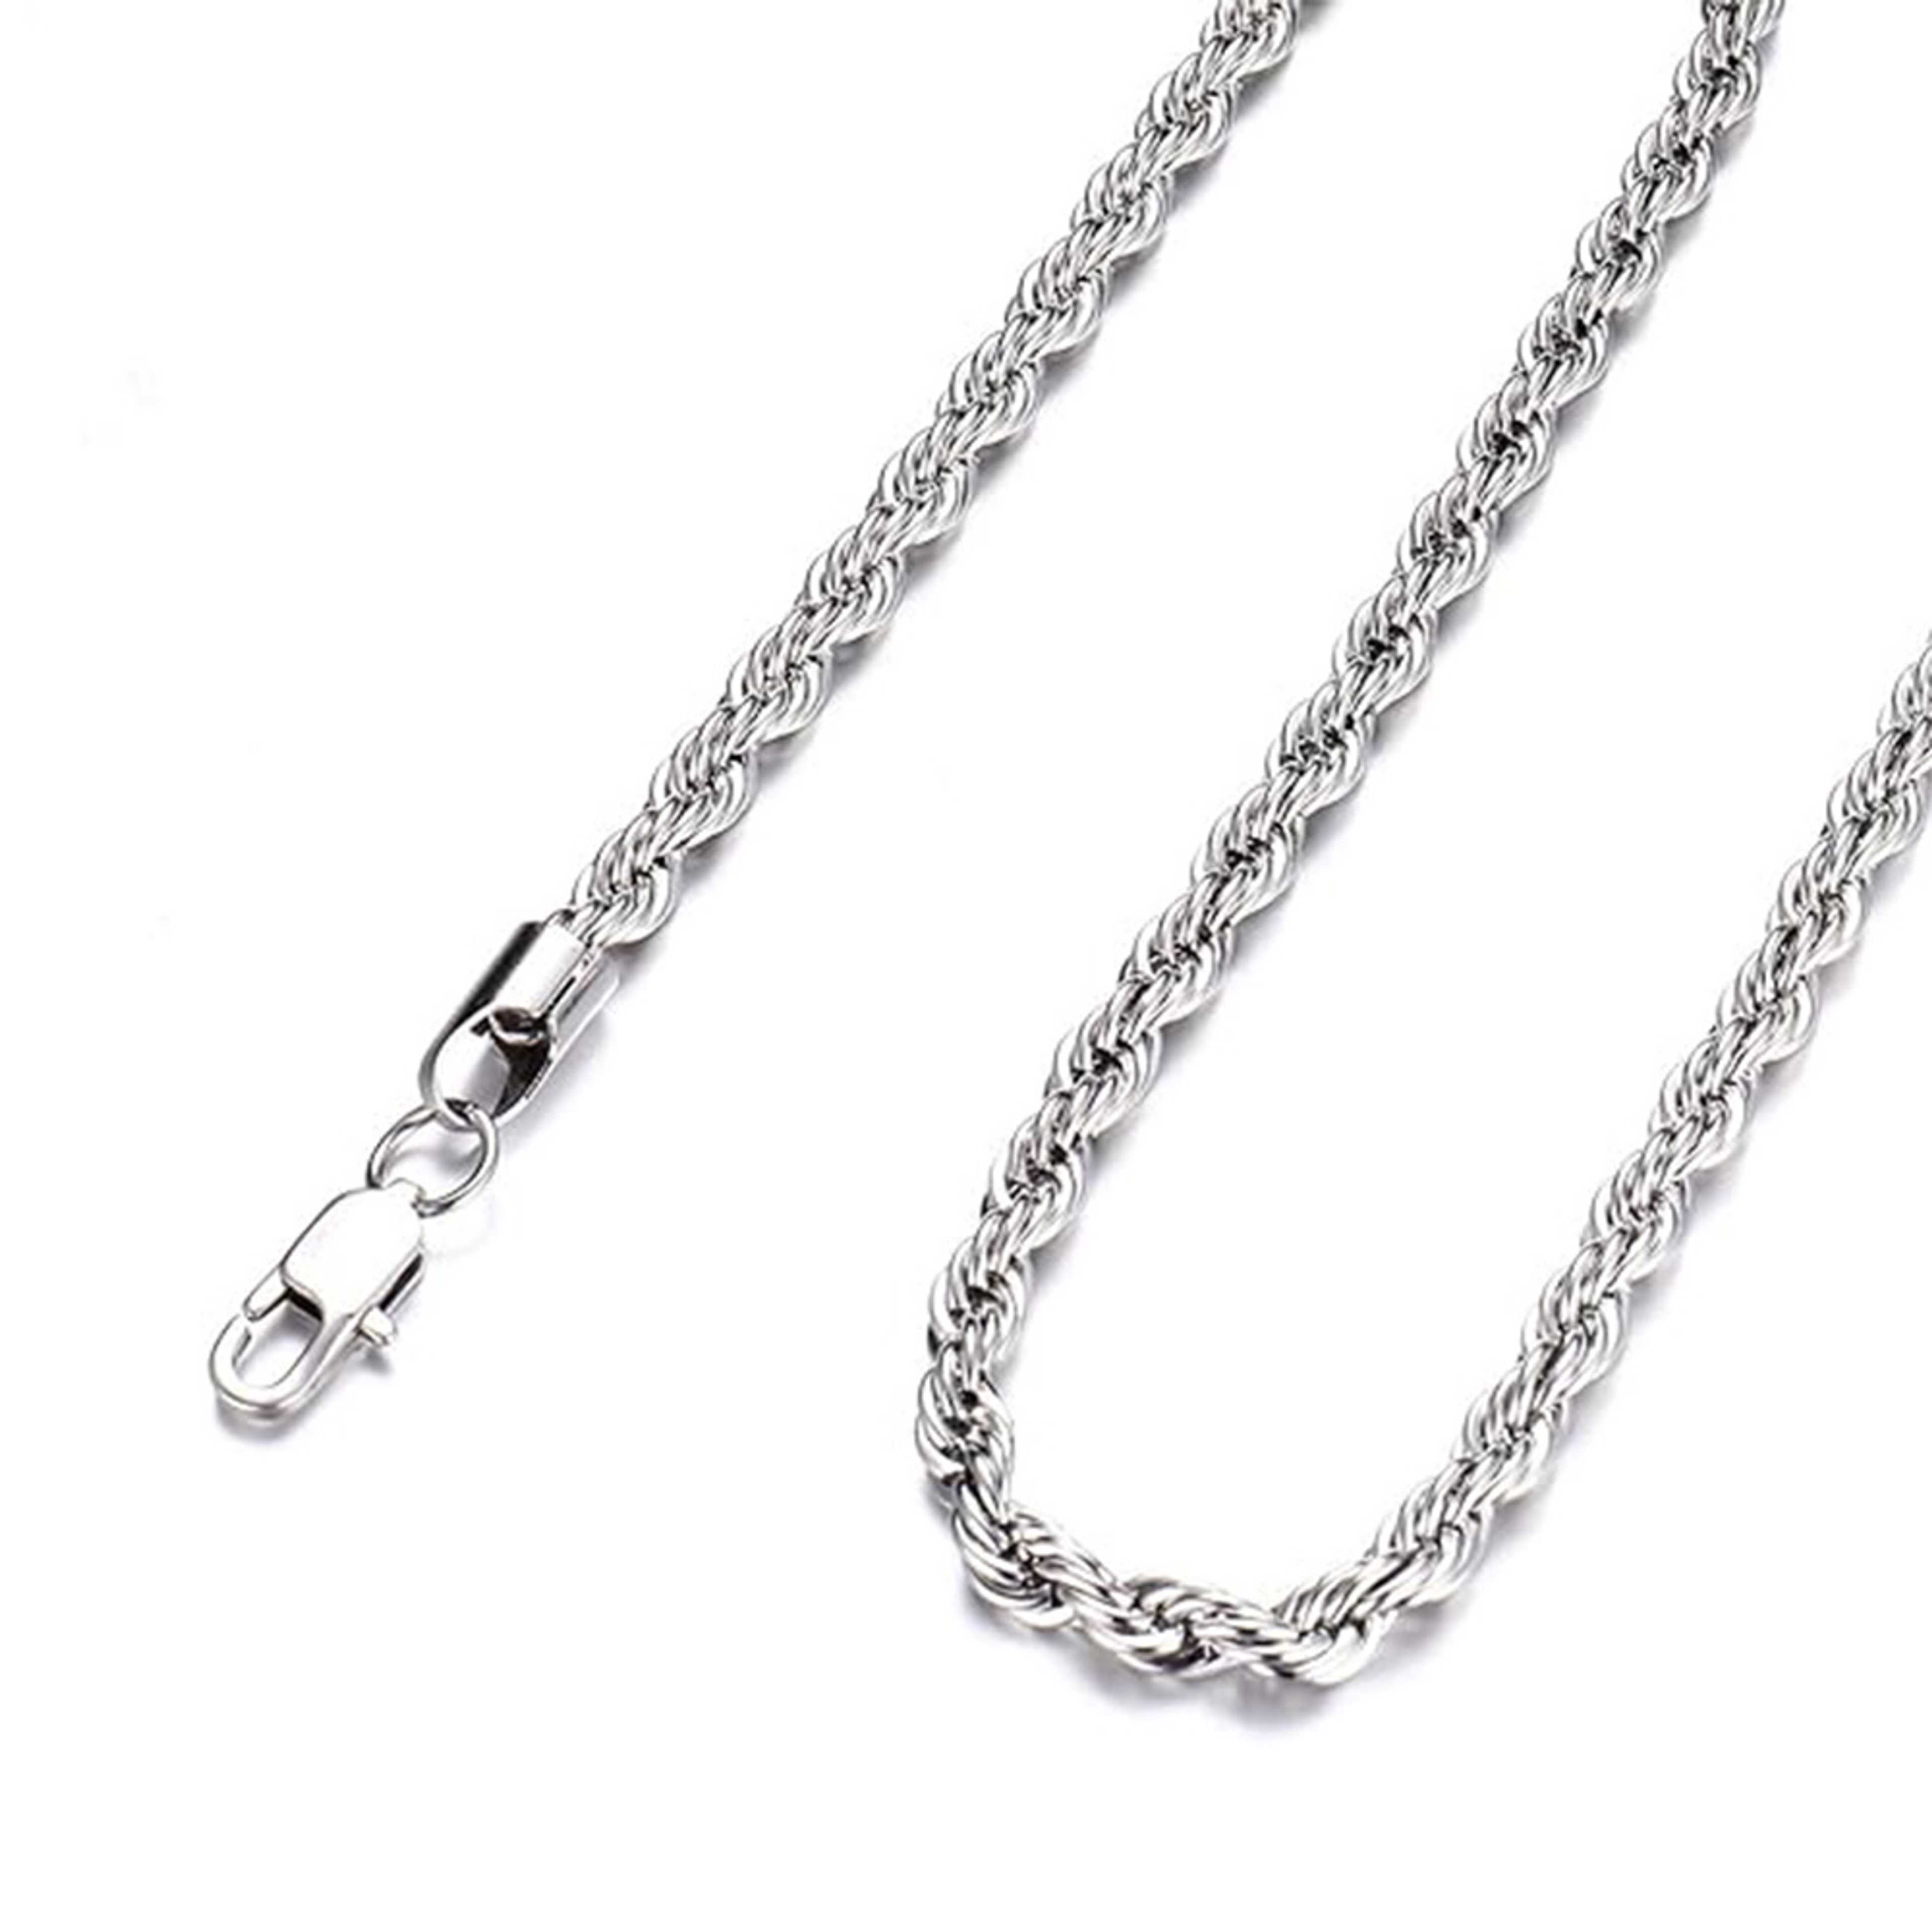 SILVER ROPE CHAIN FOR MEN